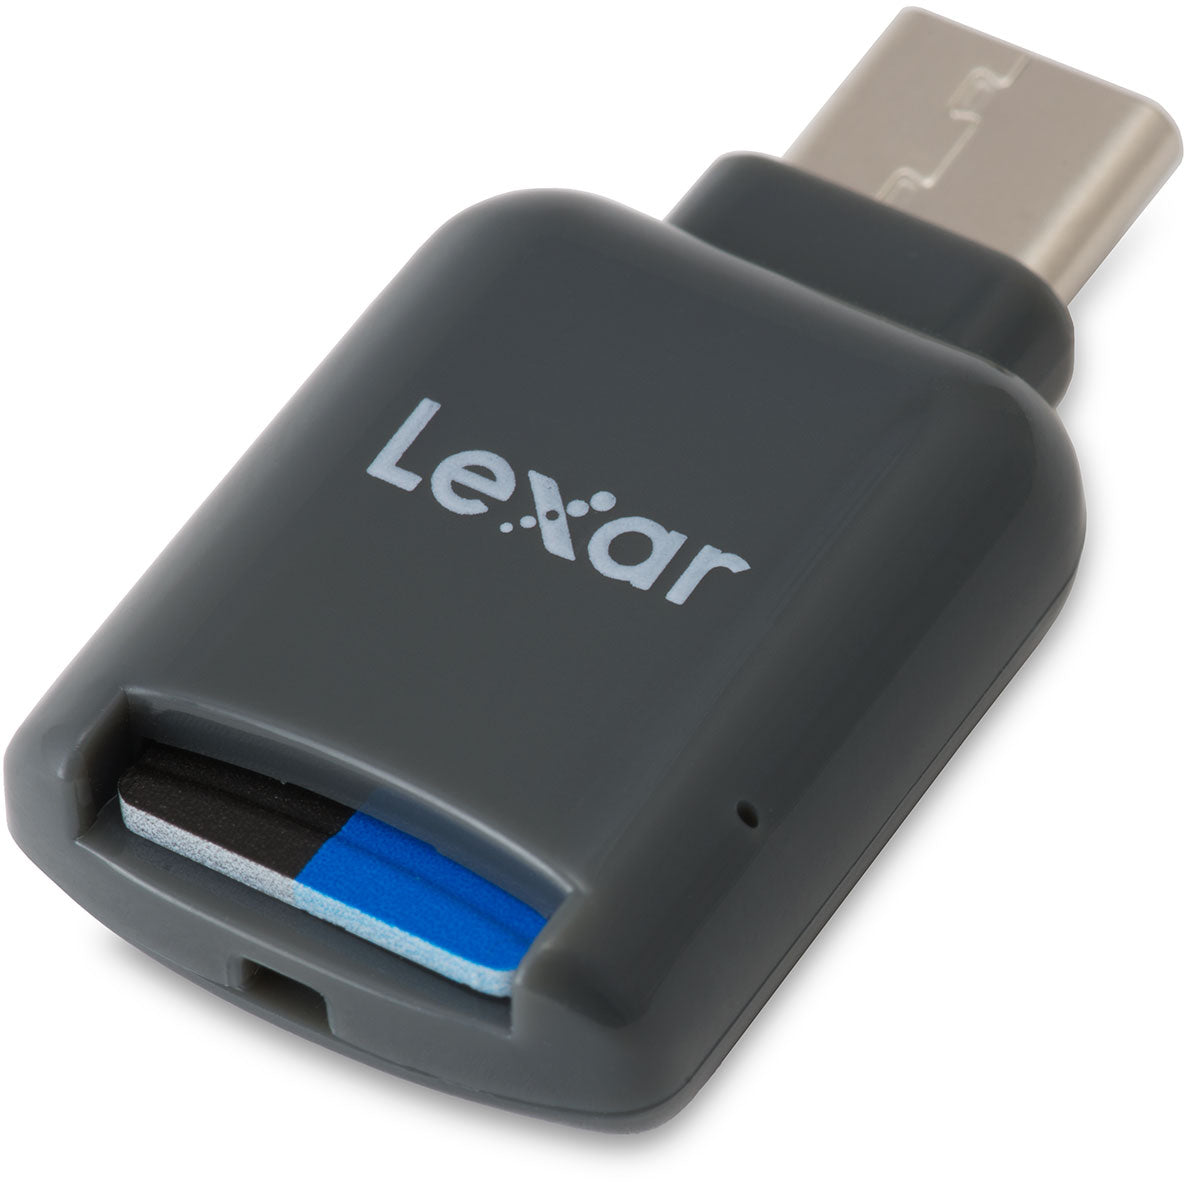 Betydning Berettigelse Derfor Lexar LRWMCBAP MicroSD to USB Type-C Adapter Reader for Android Phones – JG  Superstore